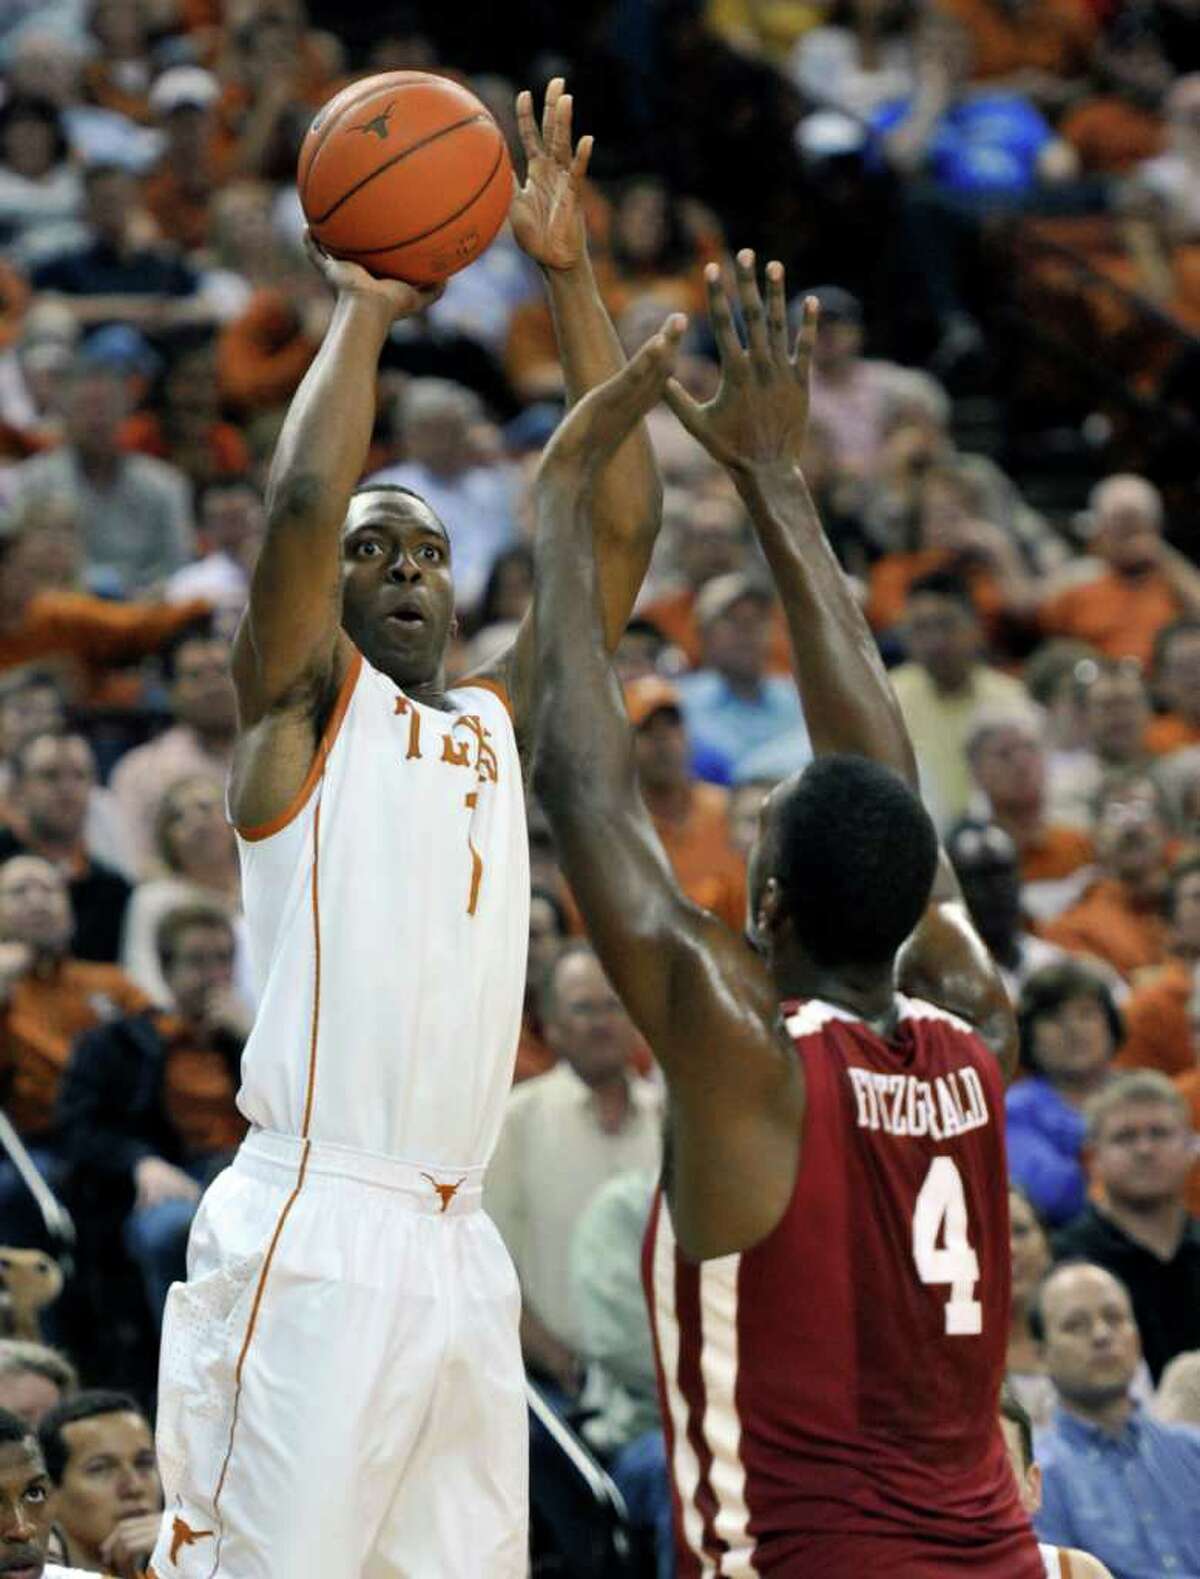 Texas guard Sheldon McClellan led all scorers with 24 points in the Horns' victory.